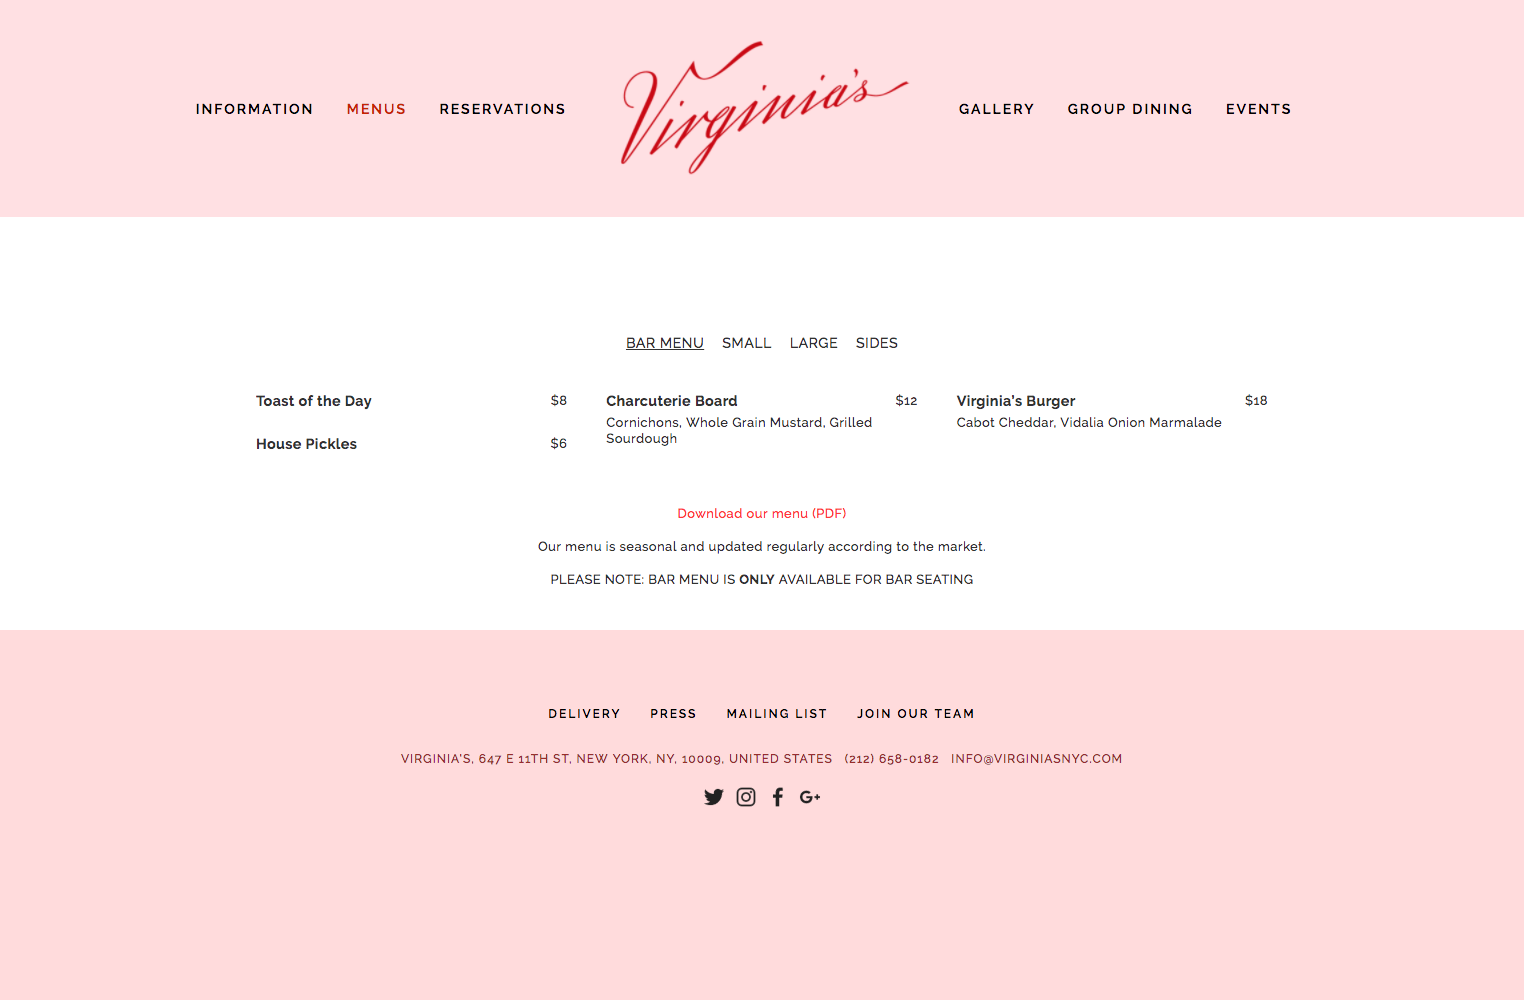 Virginia's website (http://www.virginiasnyc.com/) features an easy to find menu updated regularly.